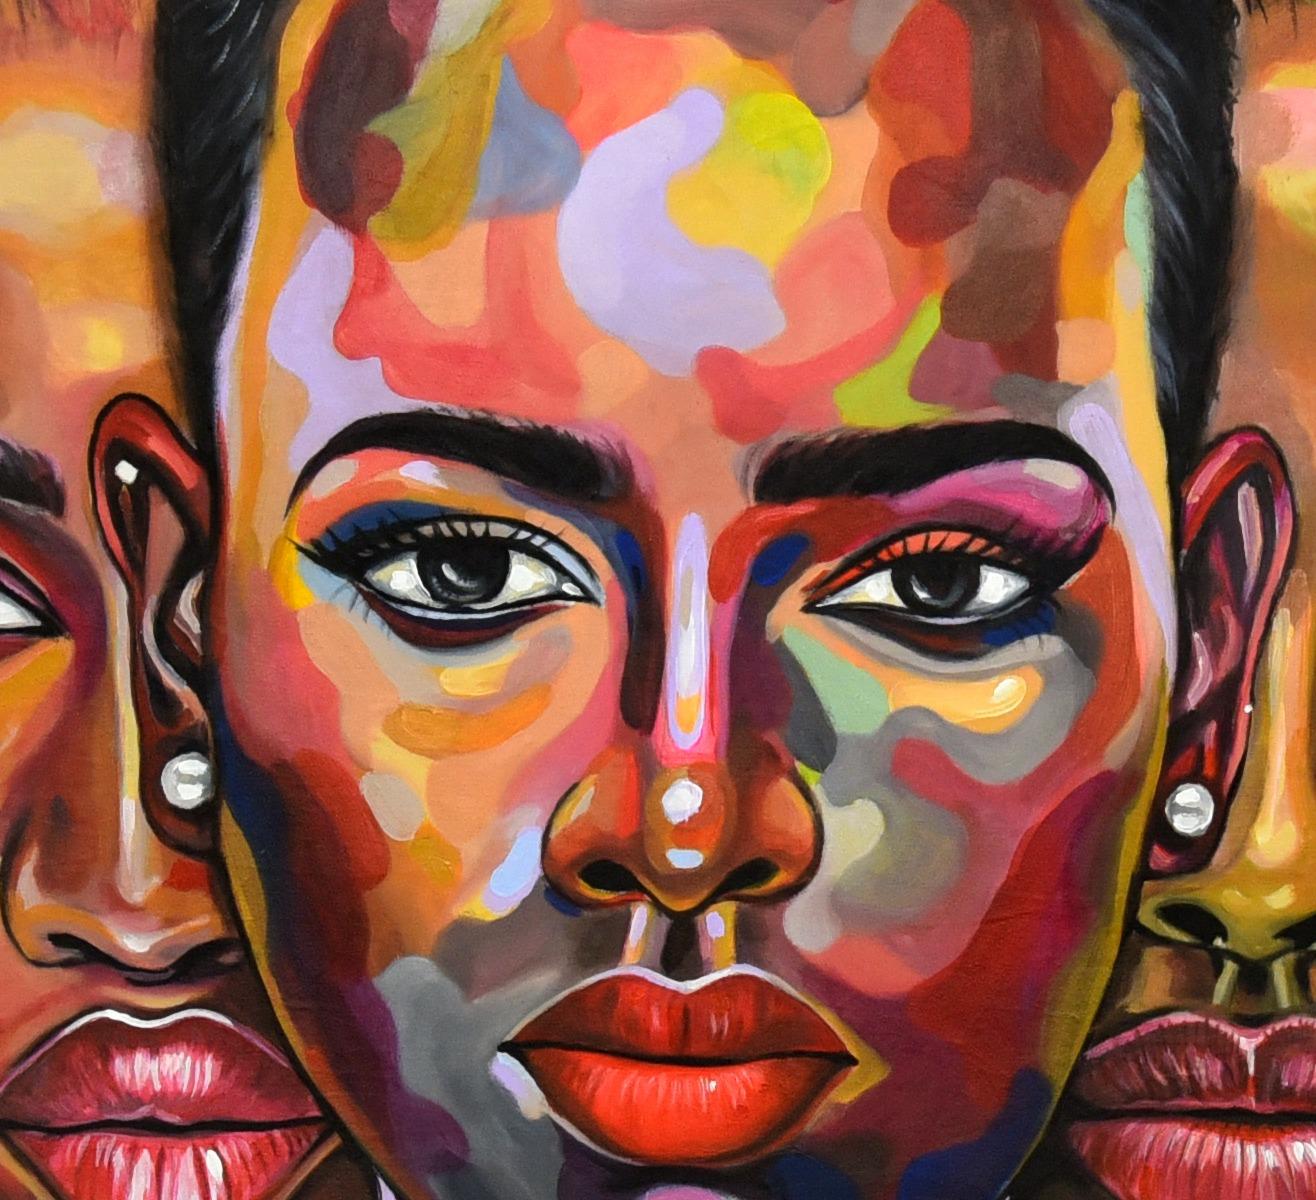 Strength In Diversity 1 - Gray Portrait Painting by Damola Ayegbayo